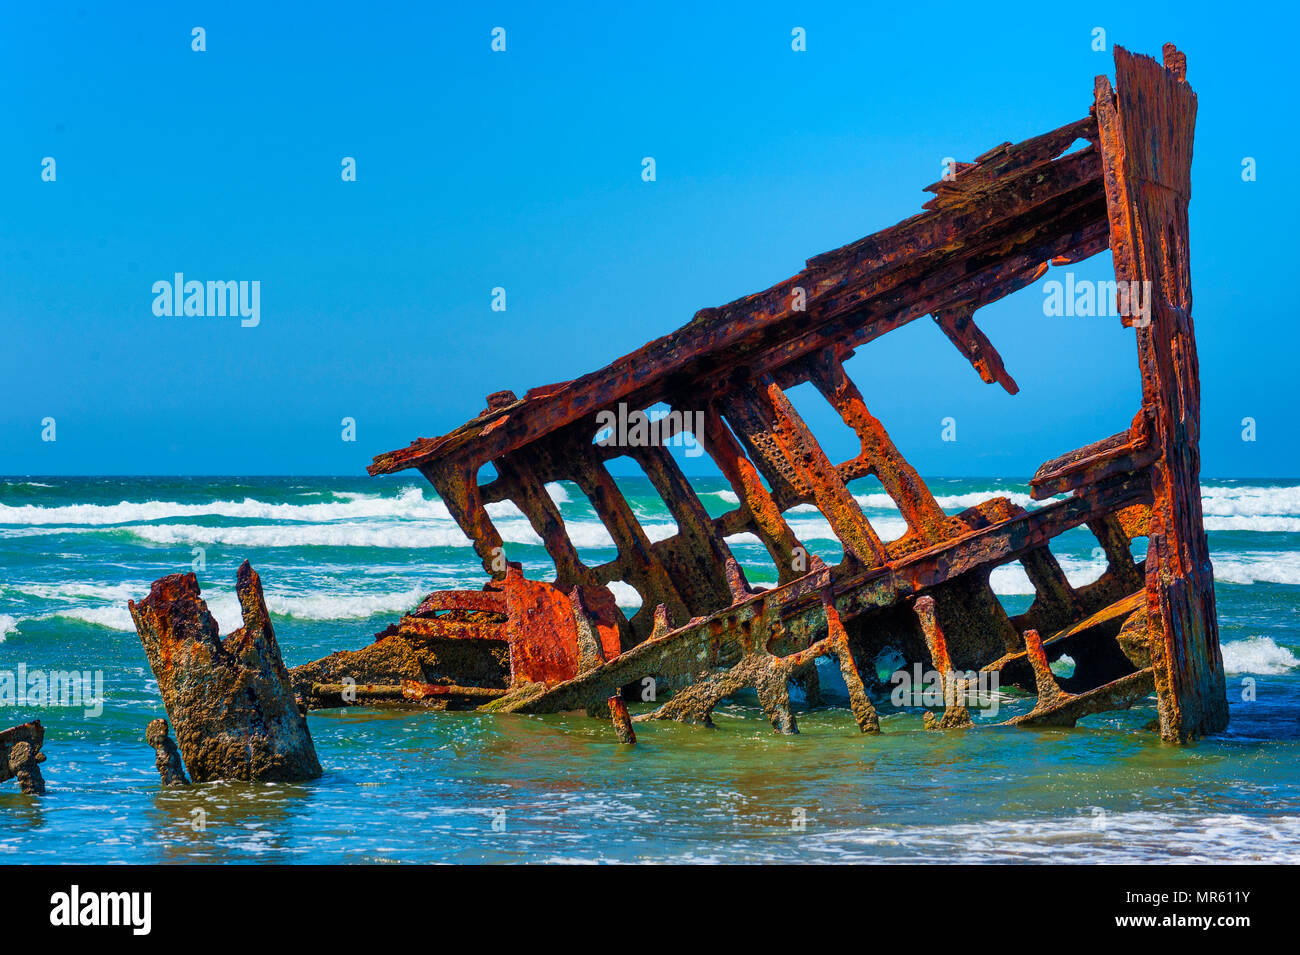 The Remains of the Peter Iredale ship that wrecked off the oregon coast in October 25, 1906. Stock Photo